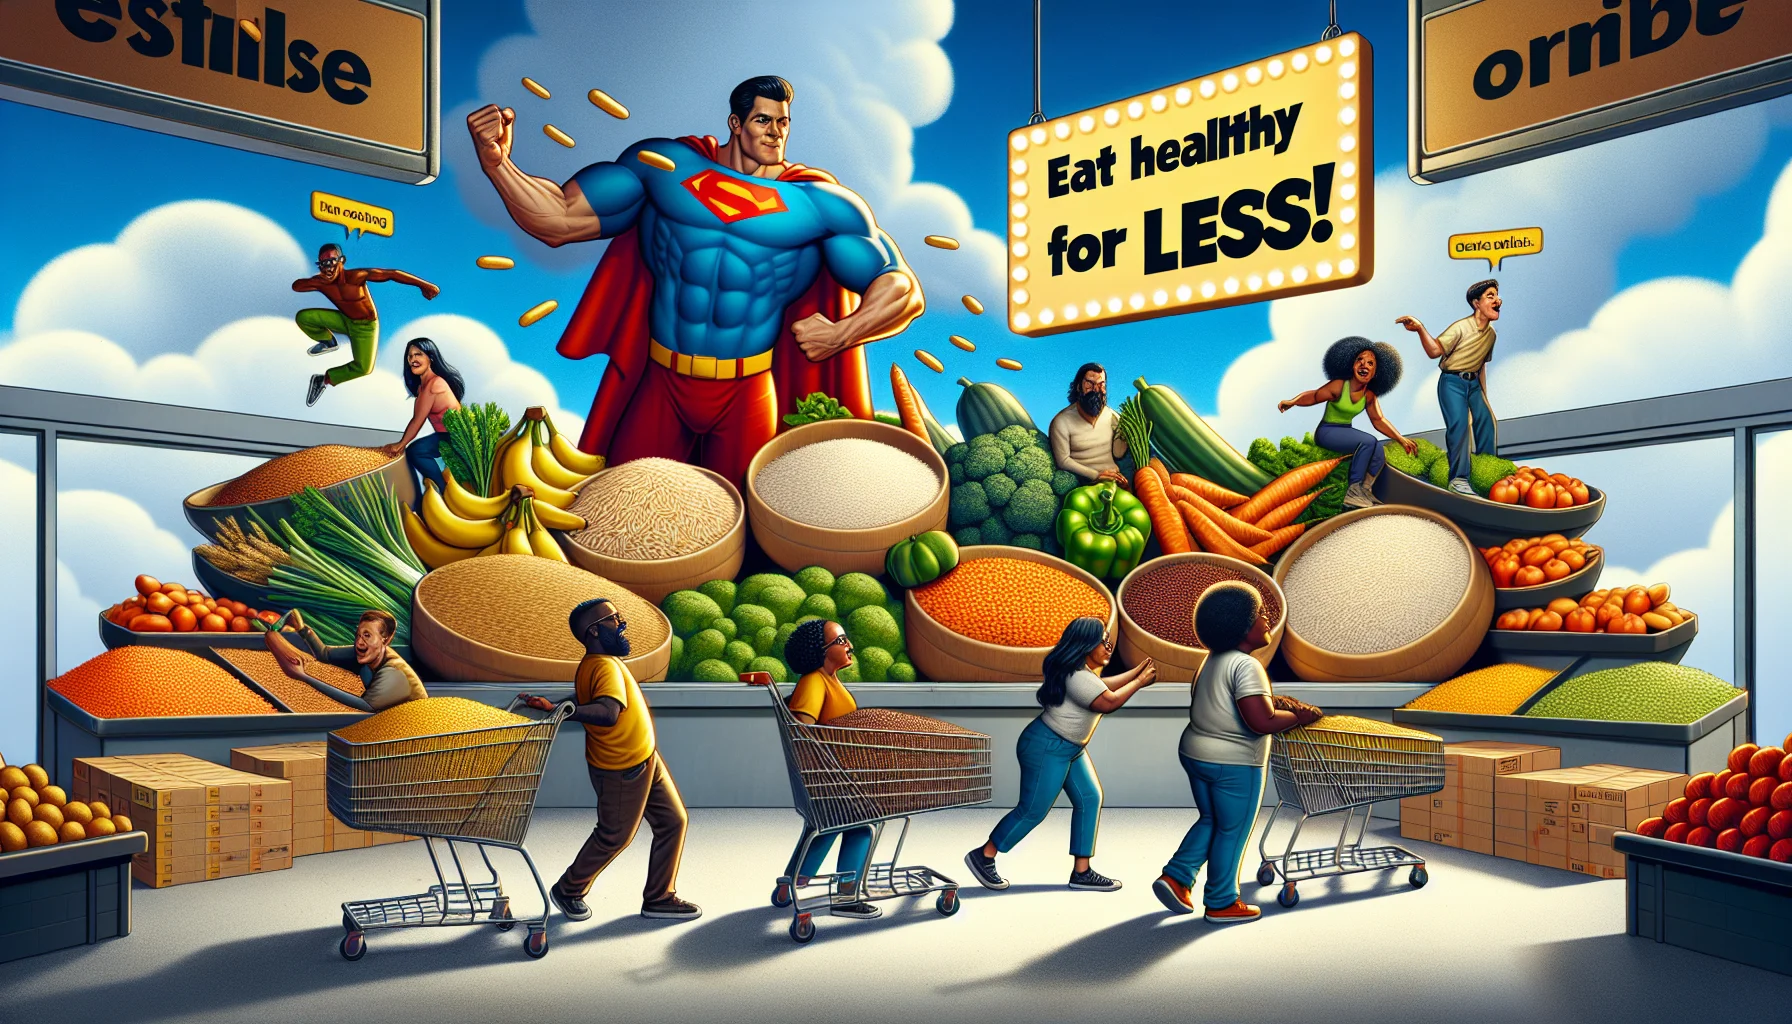 Image of a humorous scene set in a supermarket where produce items and staples such as rice, lentils, and oats are exaggerated to look larger than usual, symbolizing their greater value for maximizing a grocery budget. In this image, a variety of individuals with different descents like Caucasian, Hispanic, Black, and South Asian are seen loading these oversized food items into their carts, with comically overwhelmed expressions on their faces. Added to this entertaining scenario, there's a glowing banner in the sky that humorously says 'Eat Healthy for Less!' as if it's a superhero call to action.